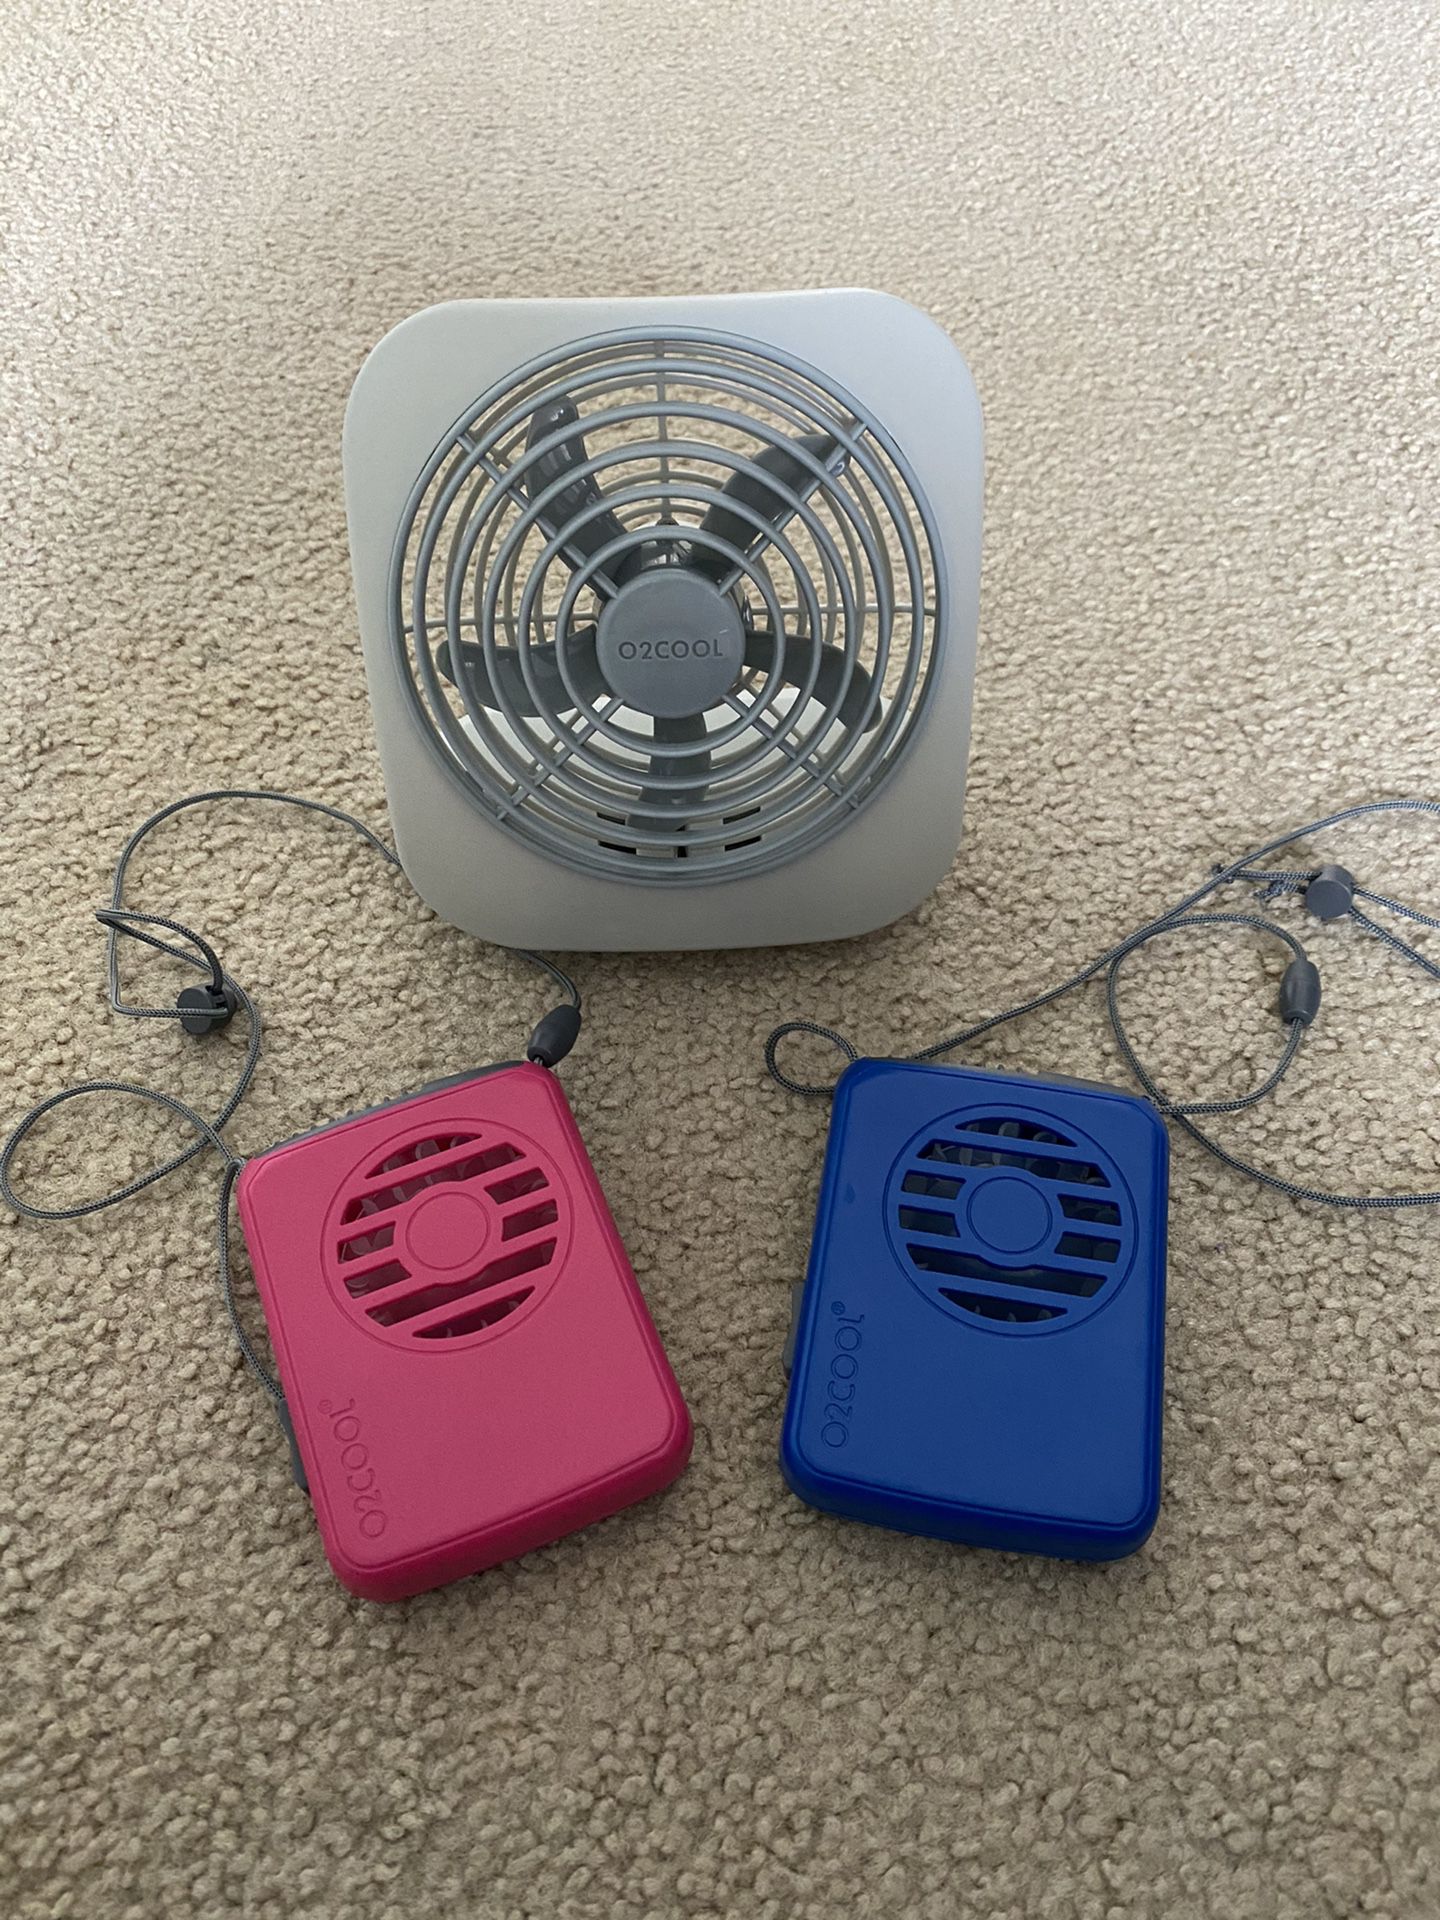 O2COOL Fans (3 total)